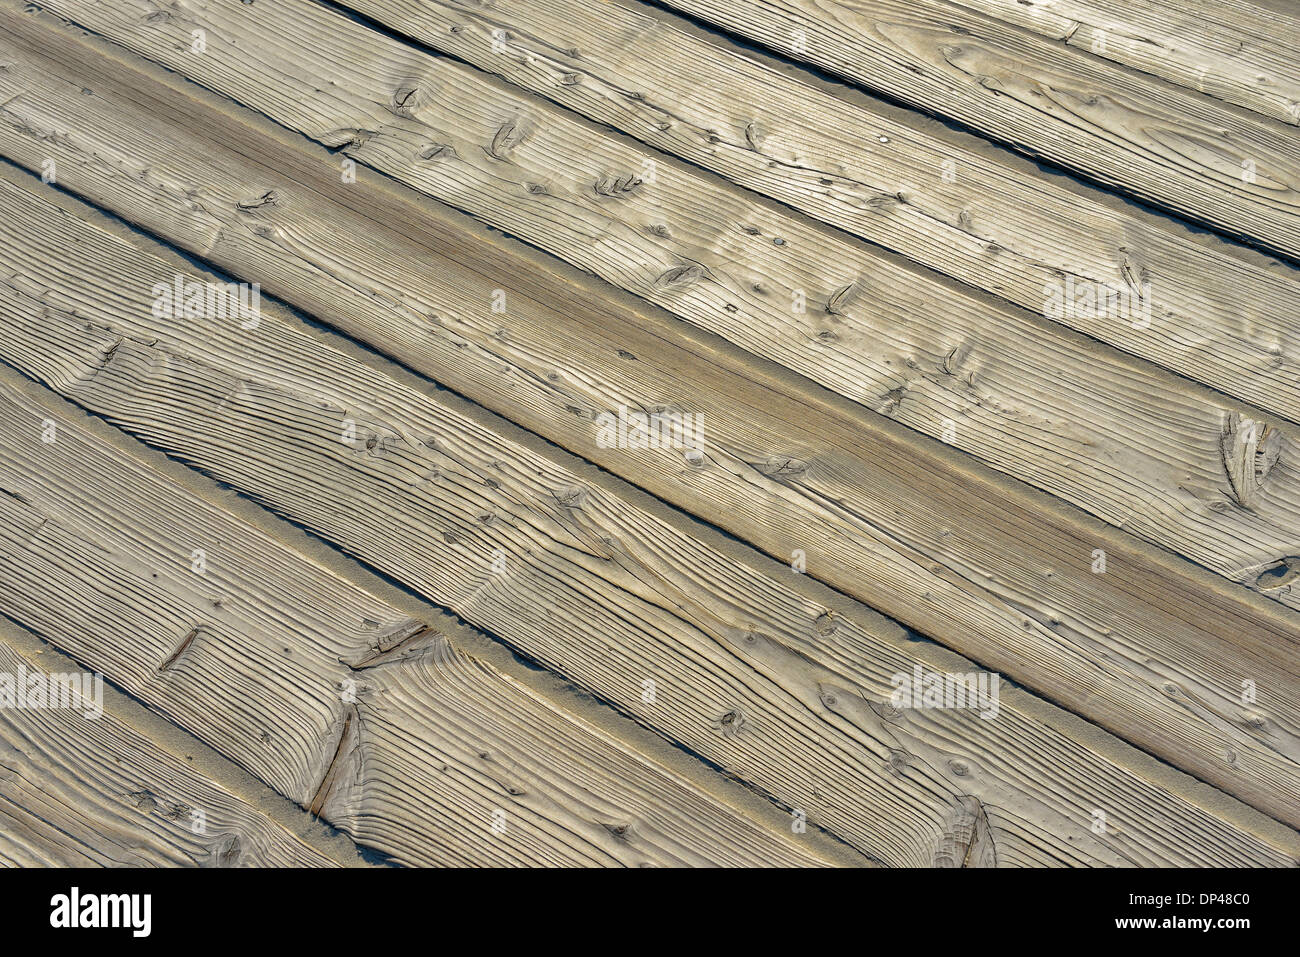 Close-up of Wooden Planks, Sankt Peter-Ording, Nordfriesland, Schleswig-Holstein, Germany Stock Photo